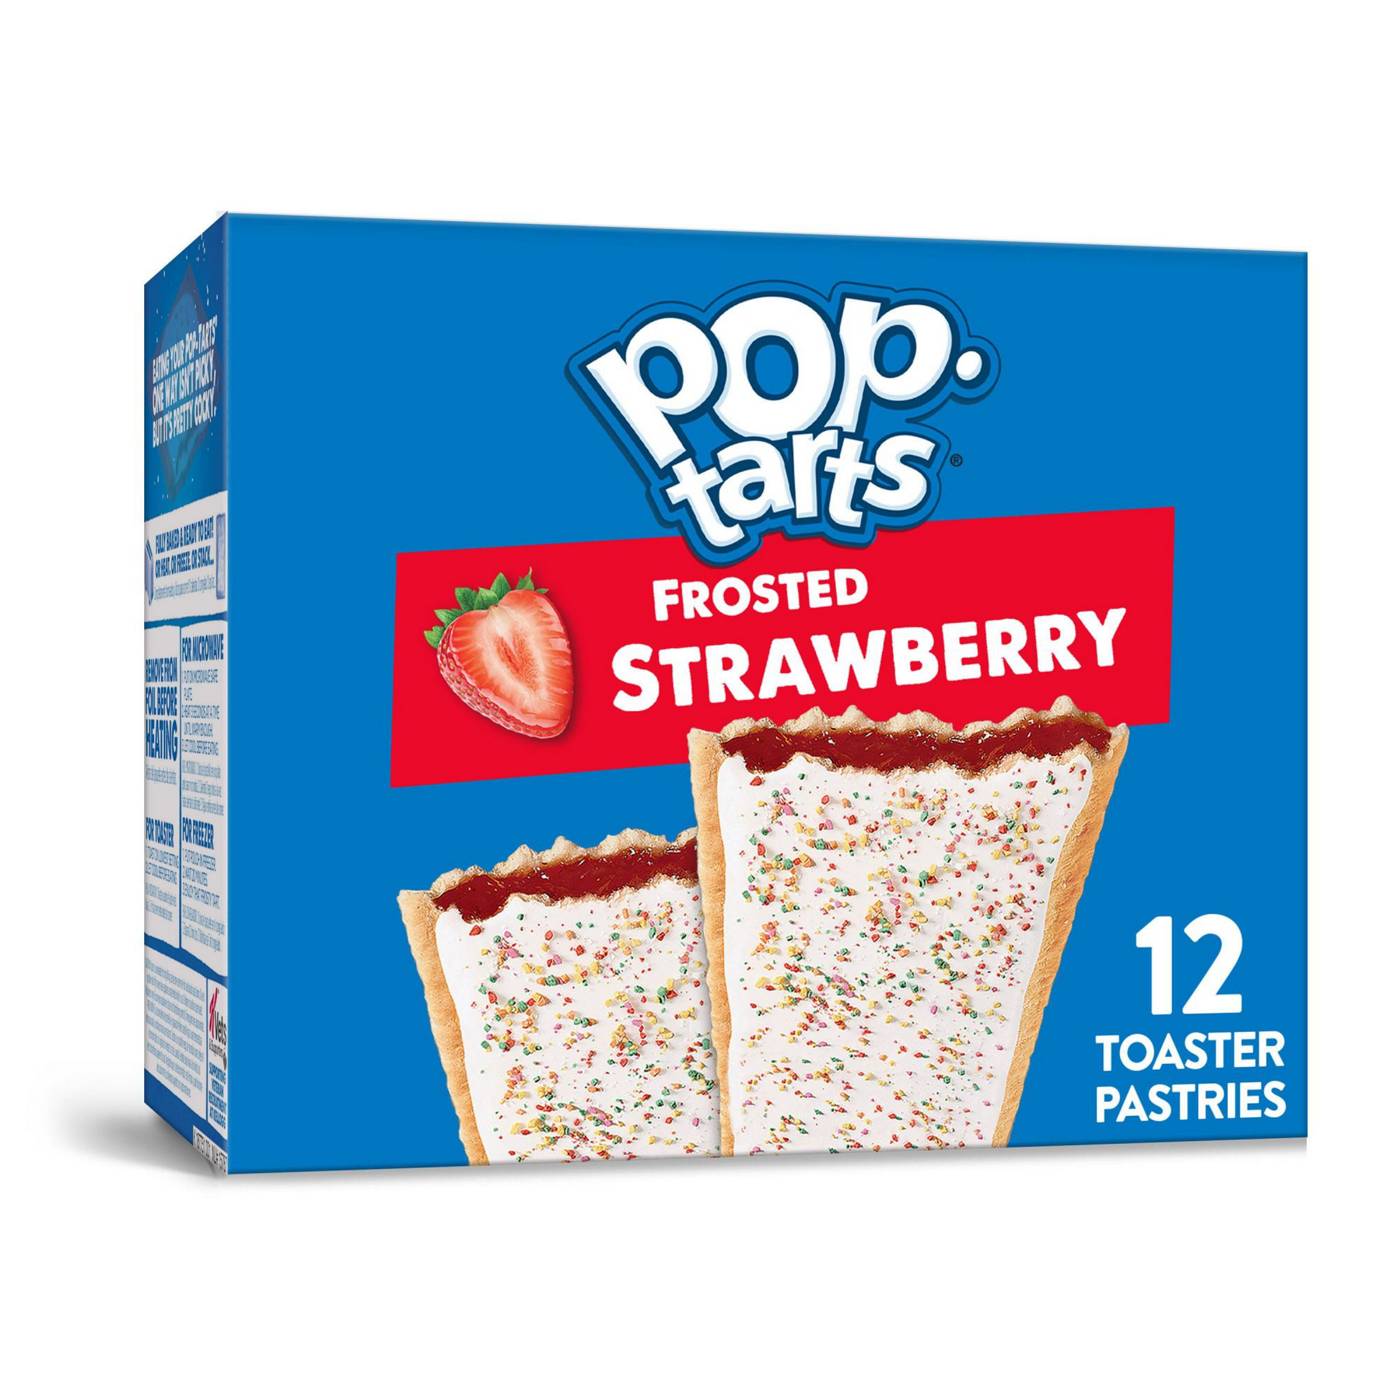 Pop-Tarts Frosted Strawberry Toaster Pastries; image 1 of 5